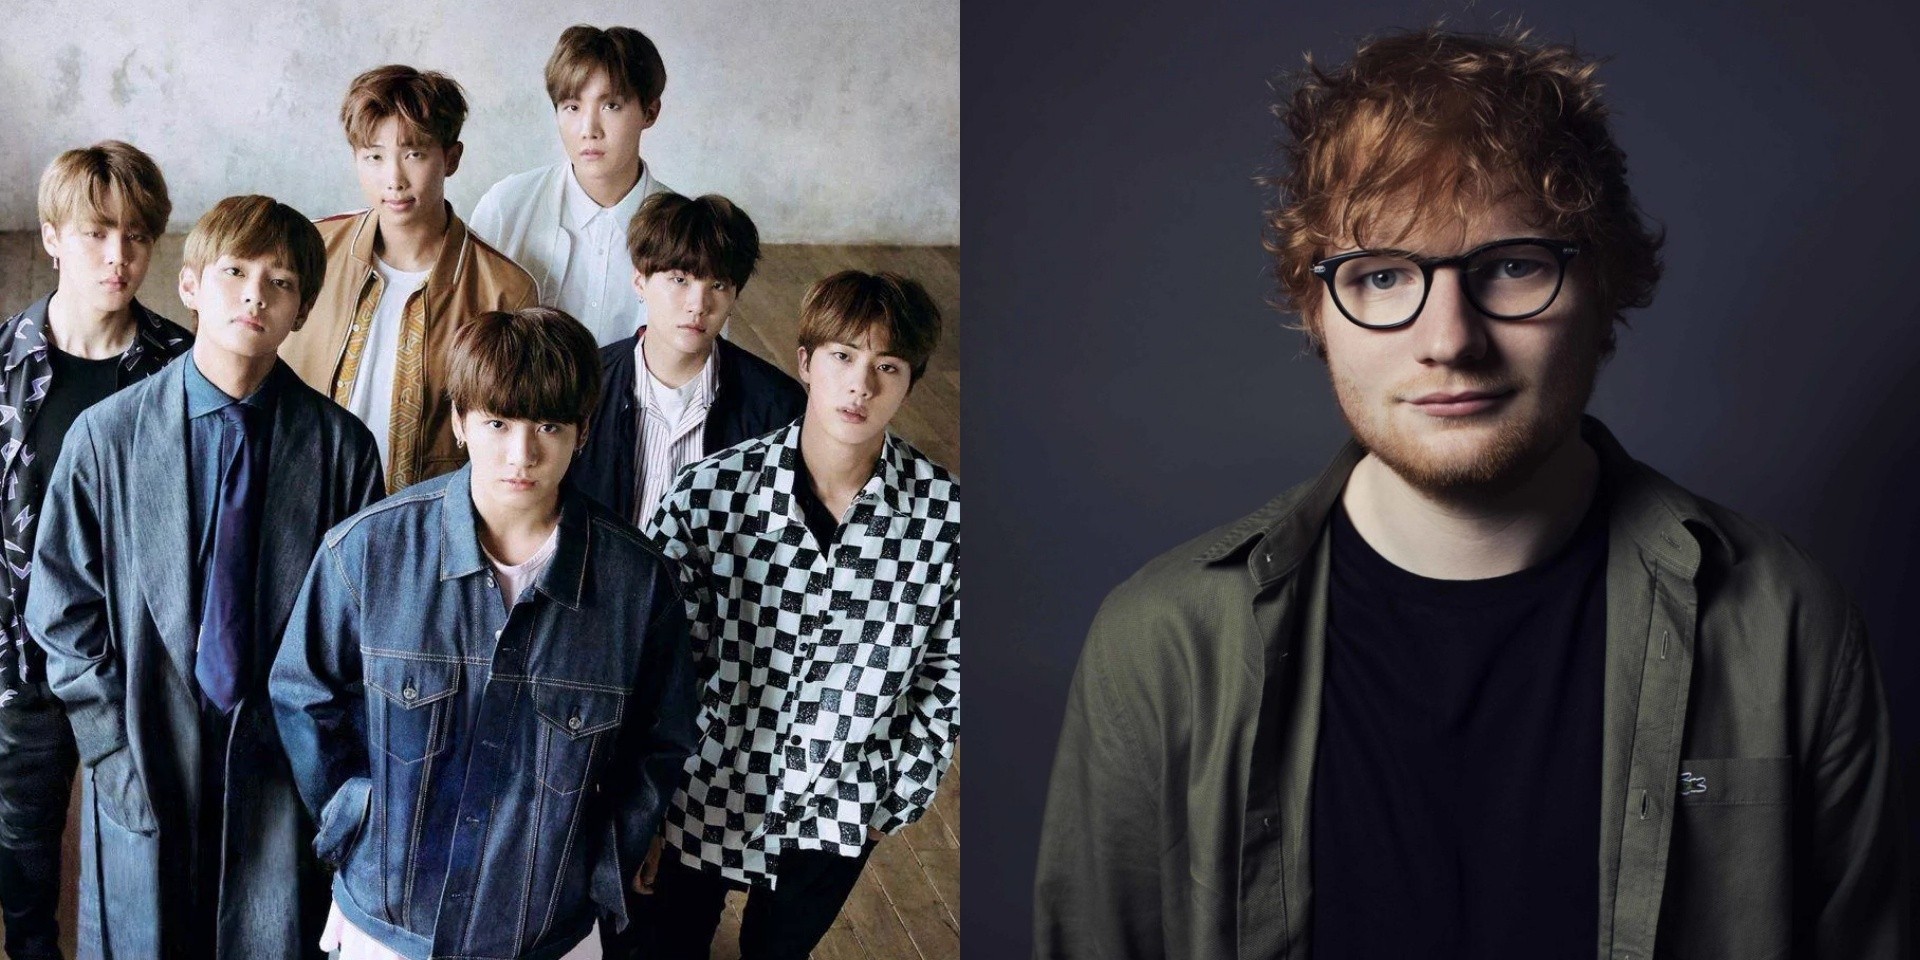 BTS confirms collaboration with Ed Sheeran on forthcoming album, out today